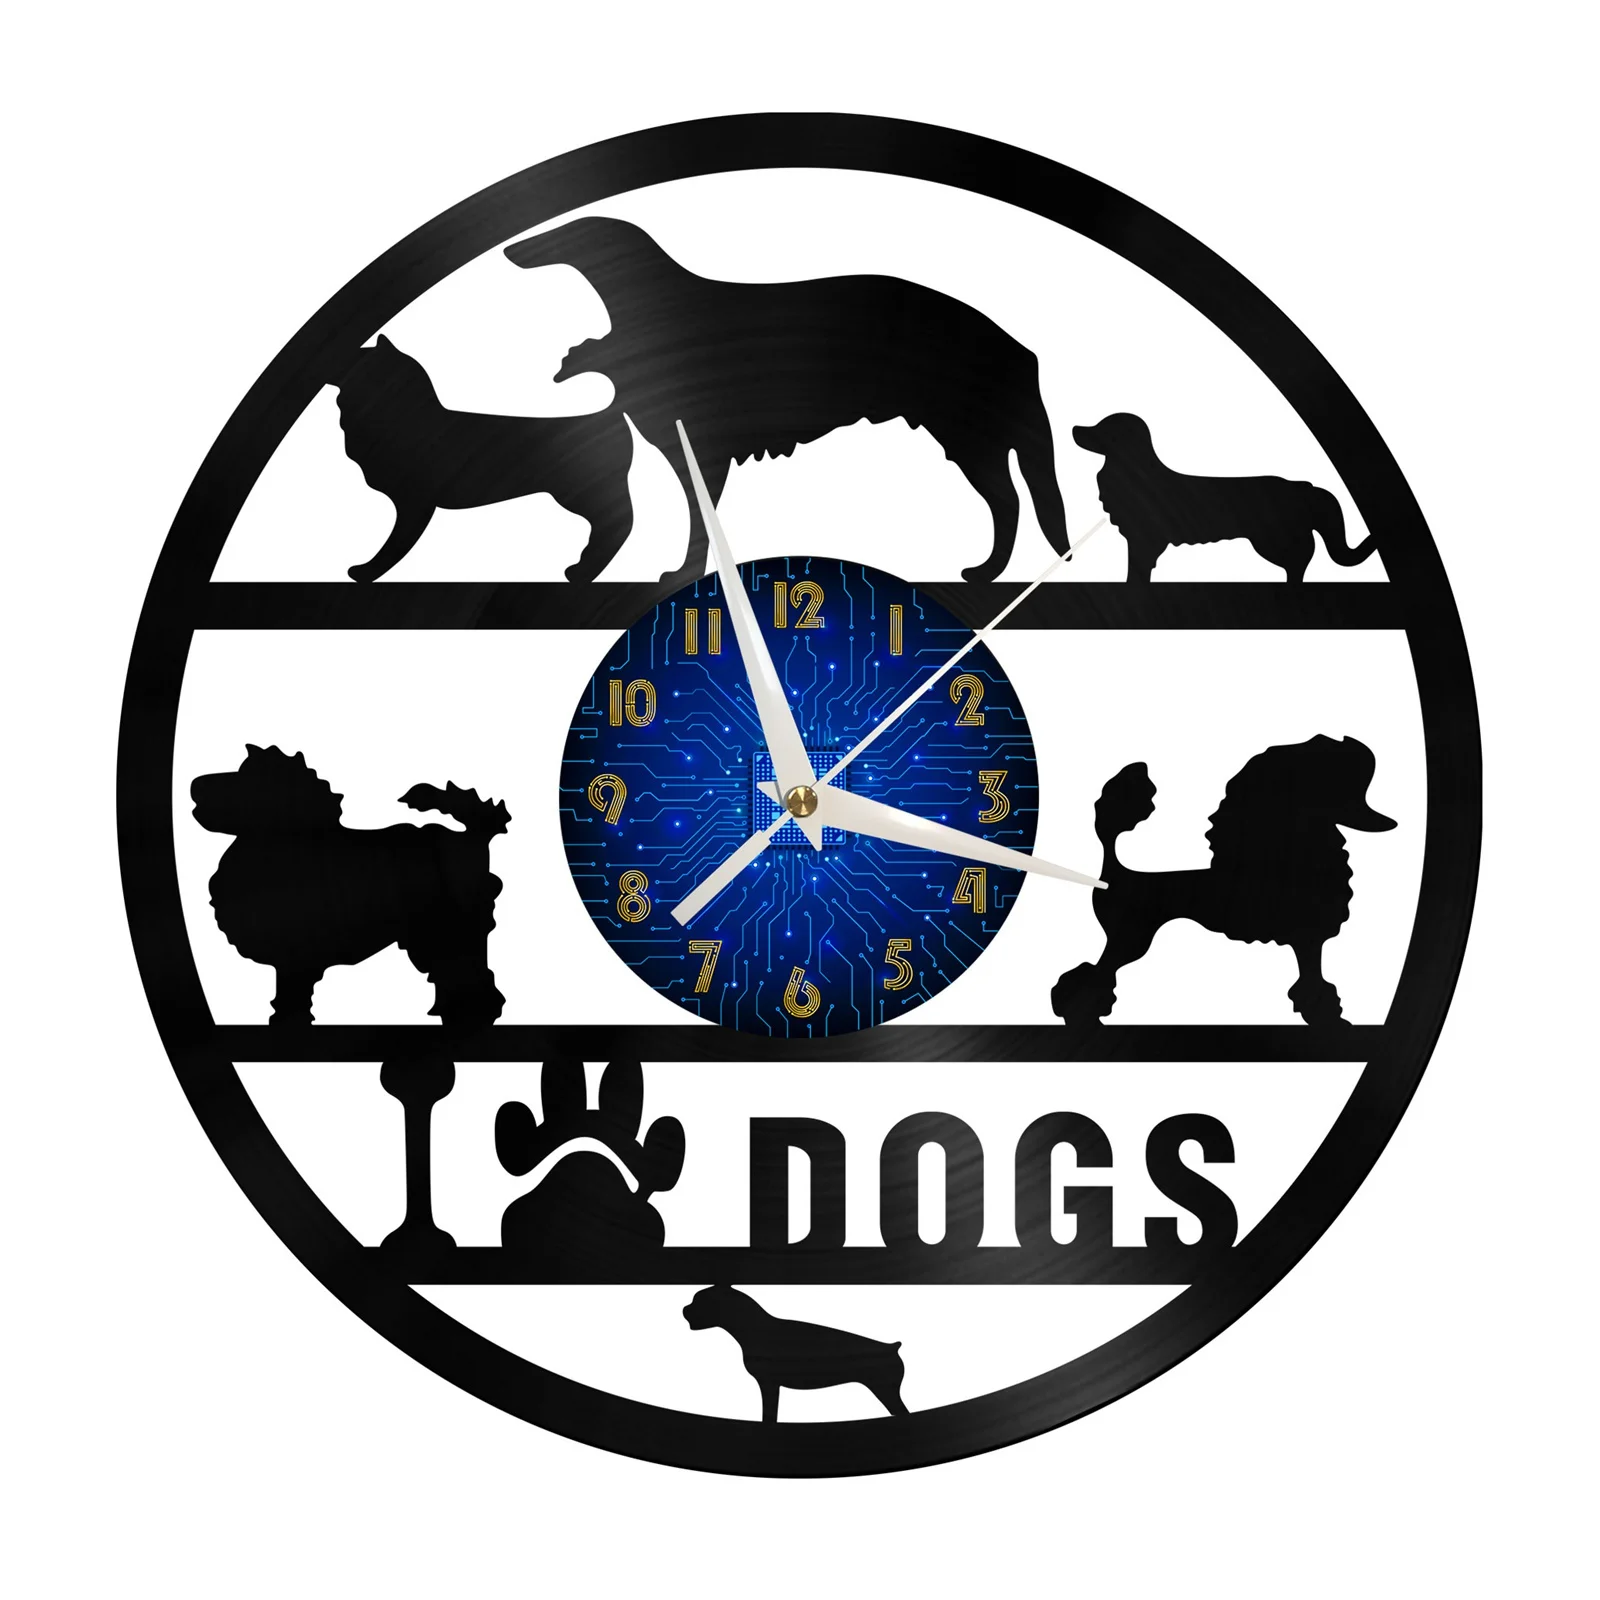 

Dog Grooming Themes 12 Inch Vinyl Record Wall Clock Battery Operated Silent Non-Ticking